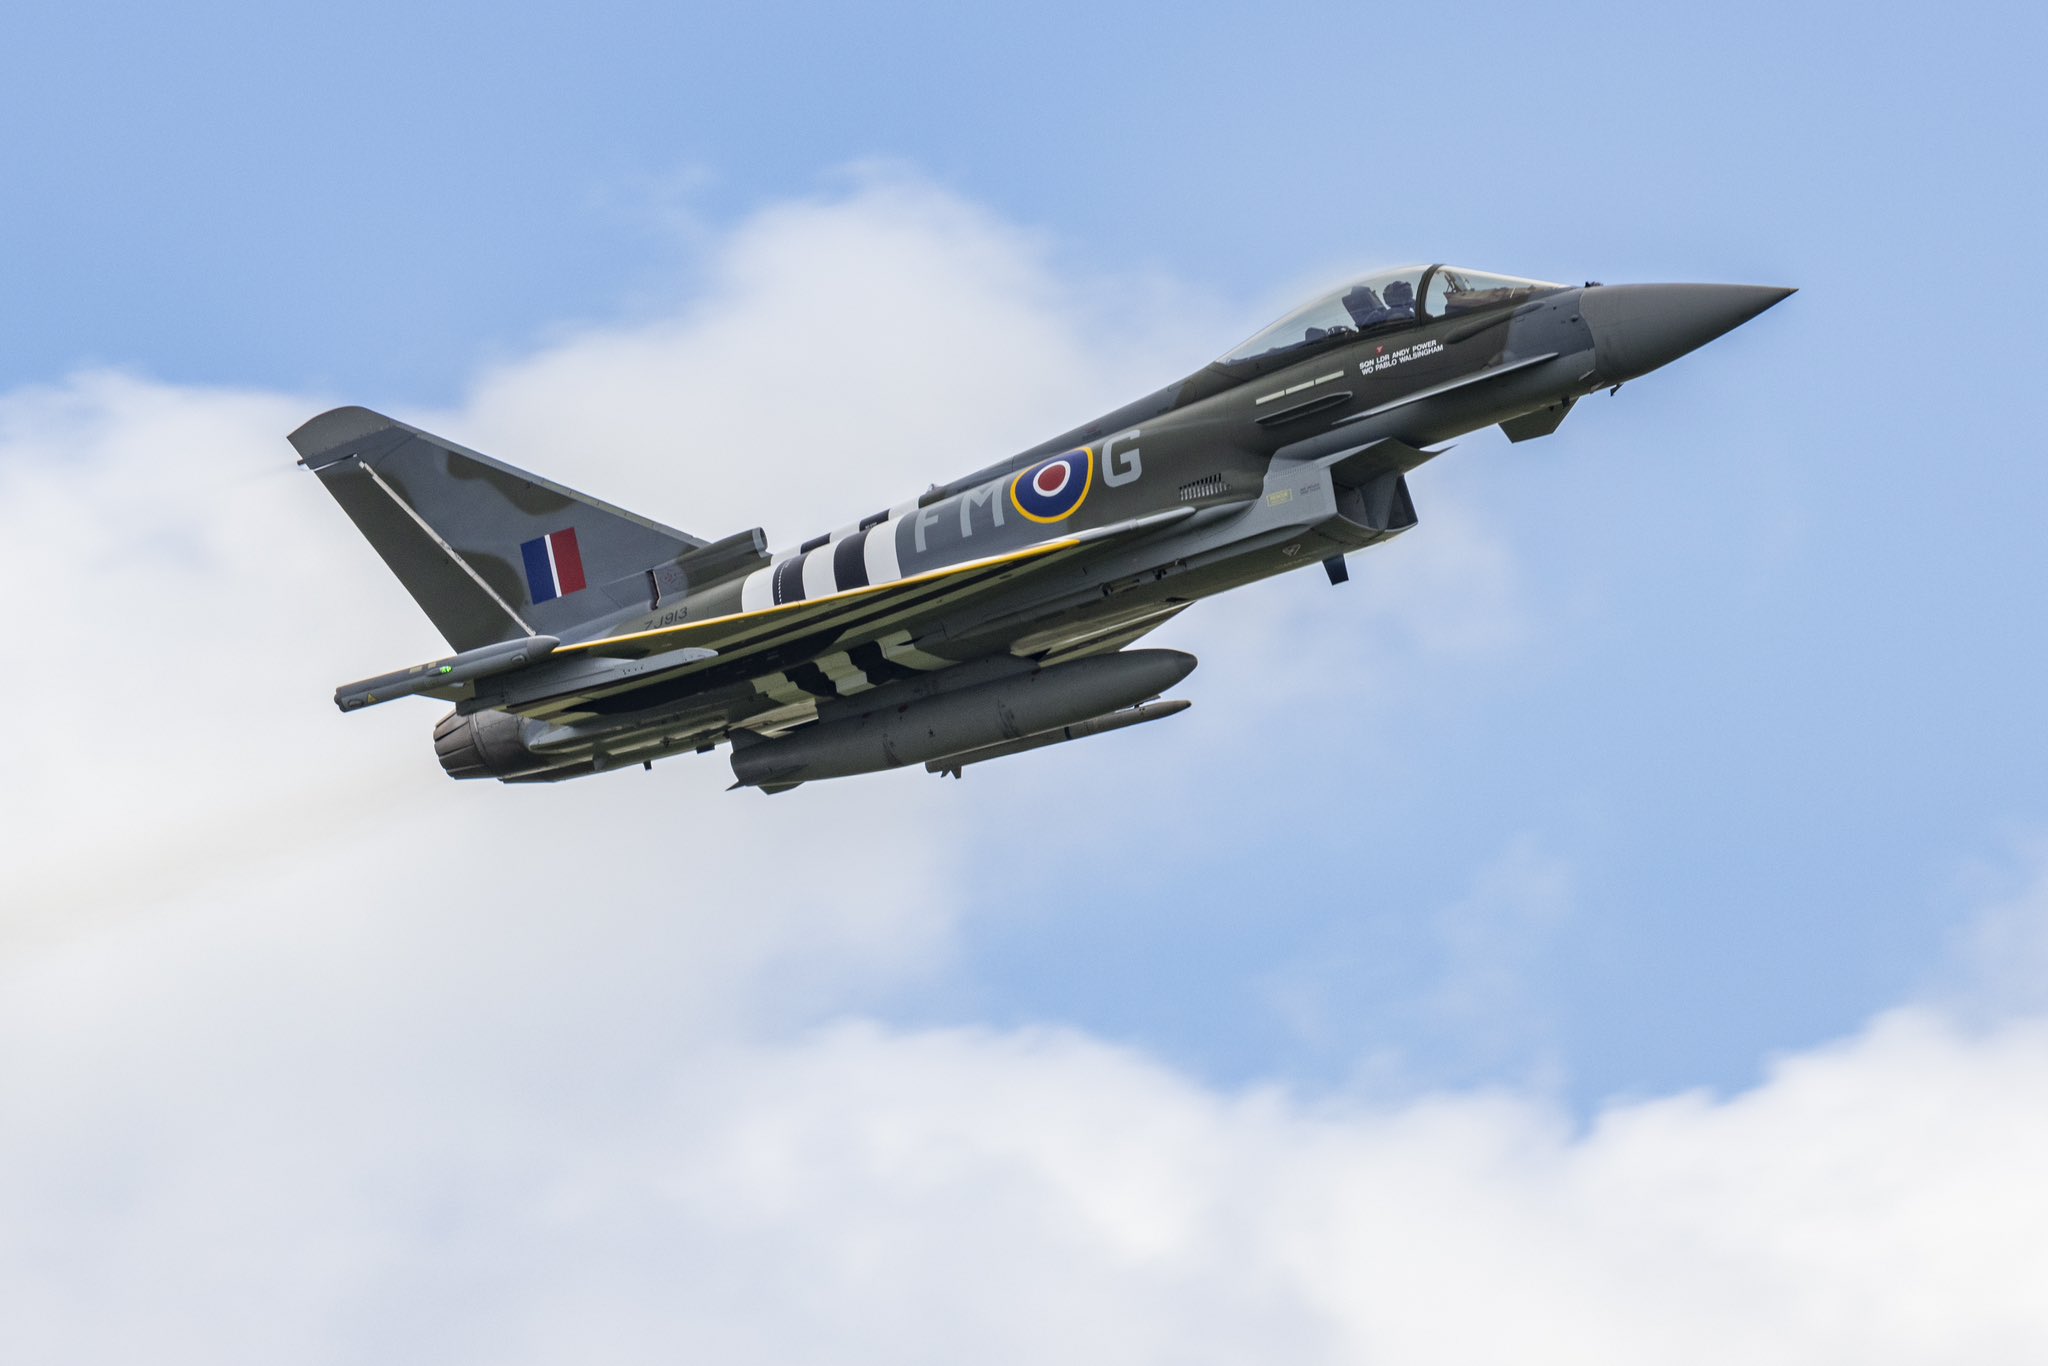 Image shows the RAF's Typhoon display aircraft with D-Day livery.